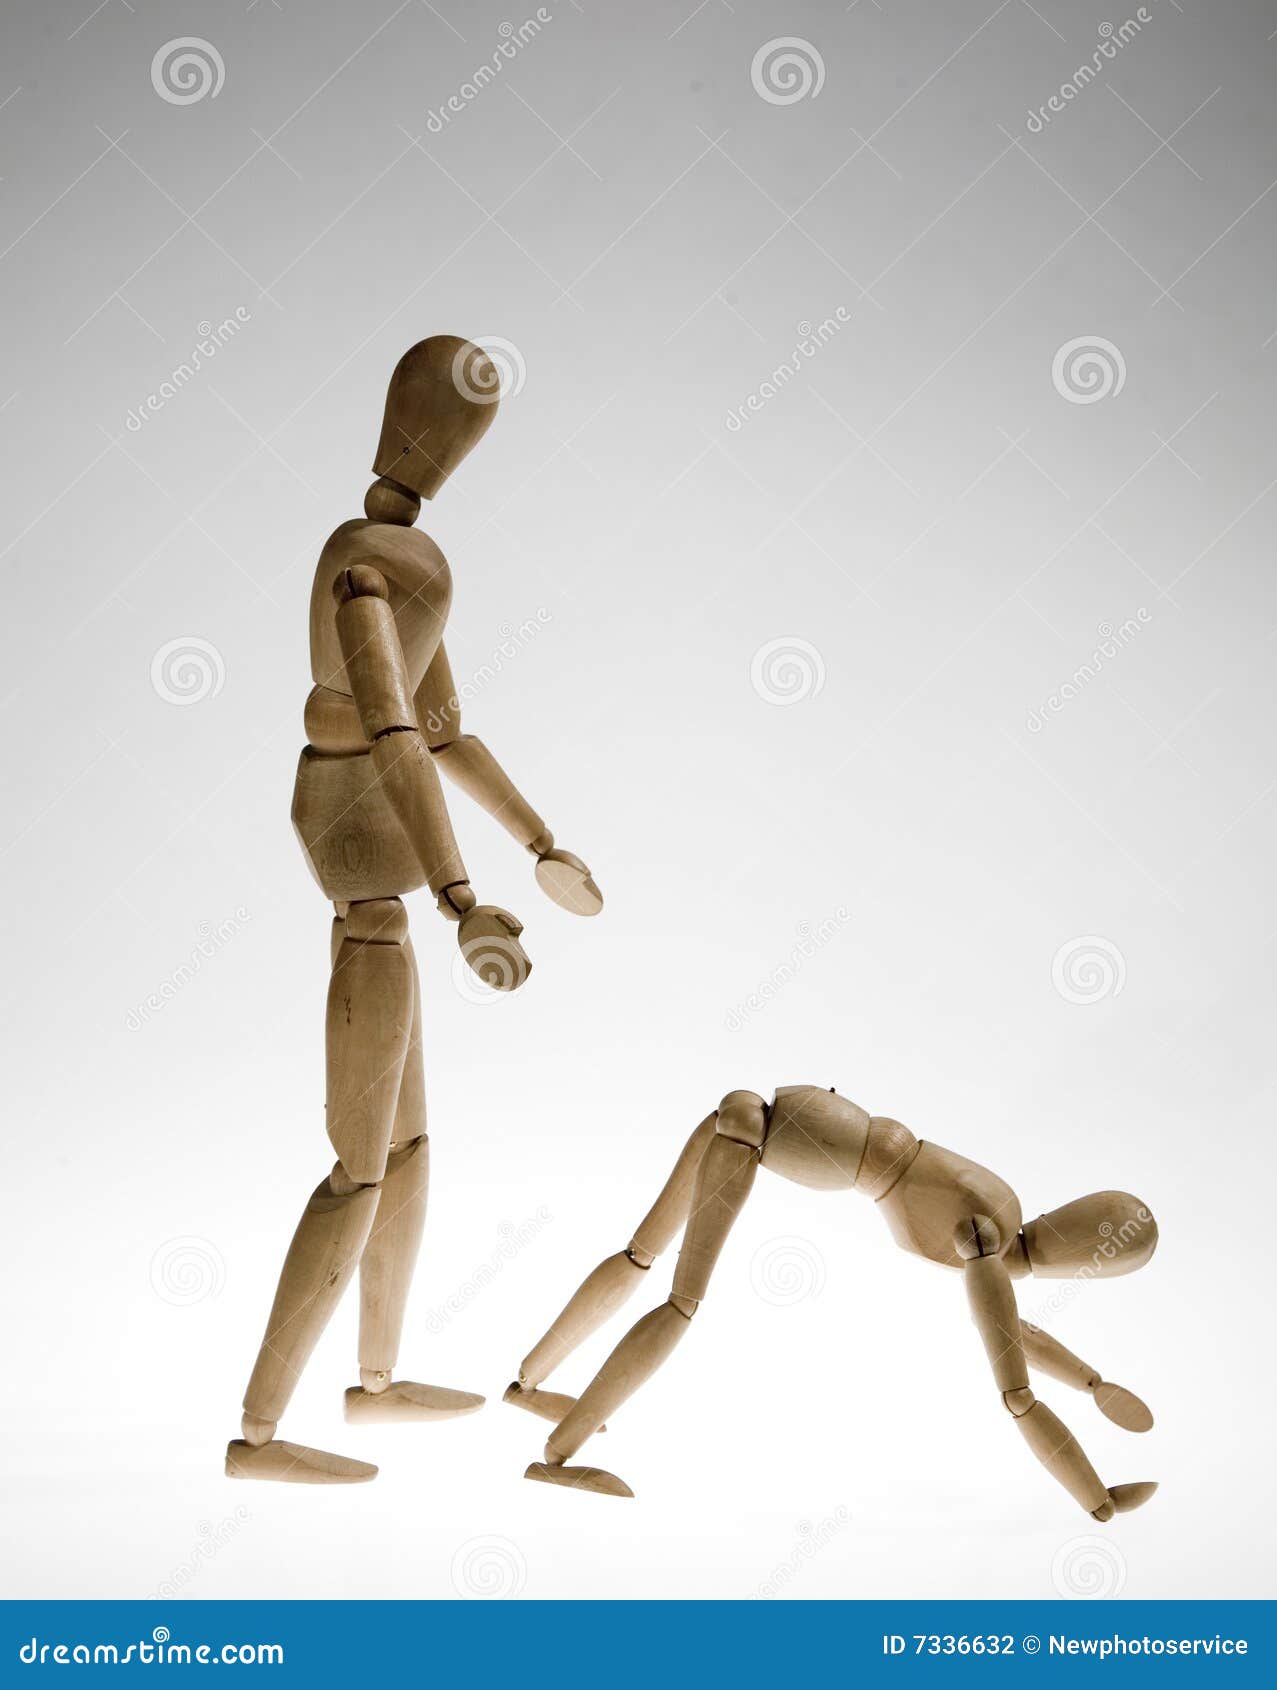 Wooden man poses. Wood dummy toy, group people statue human